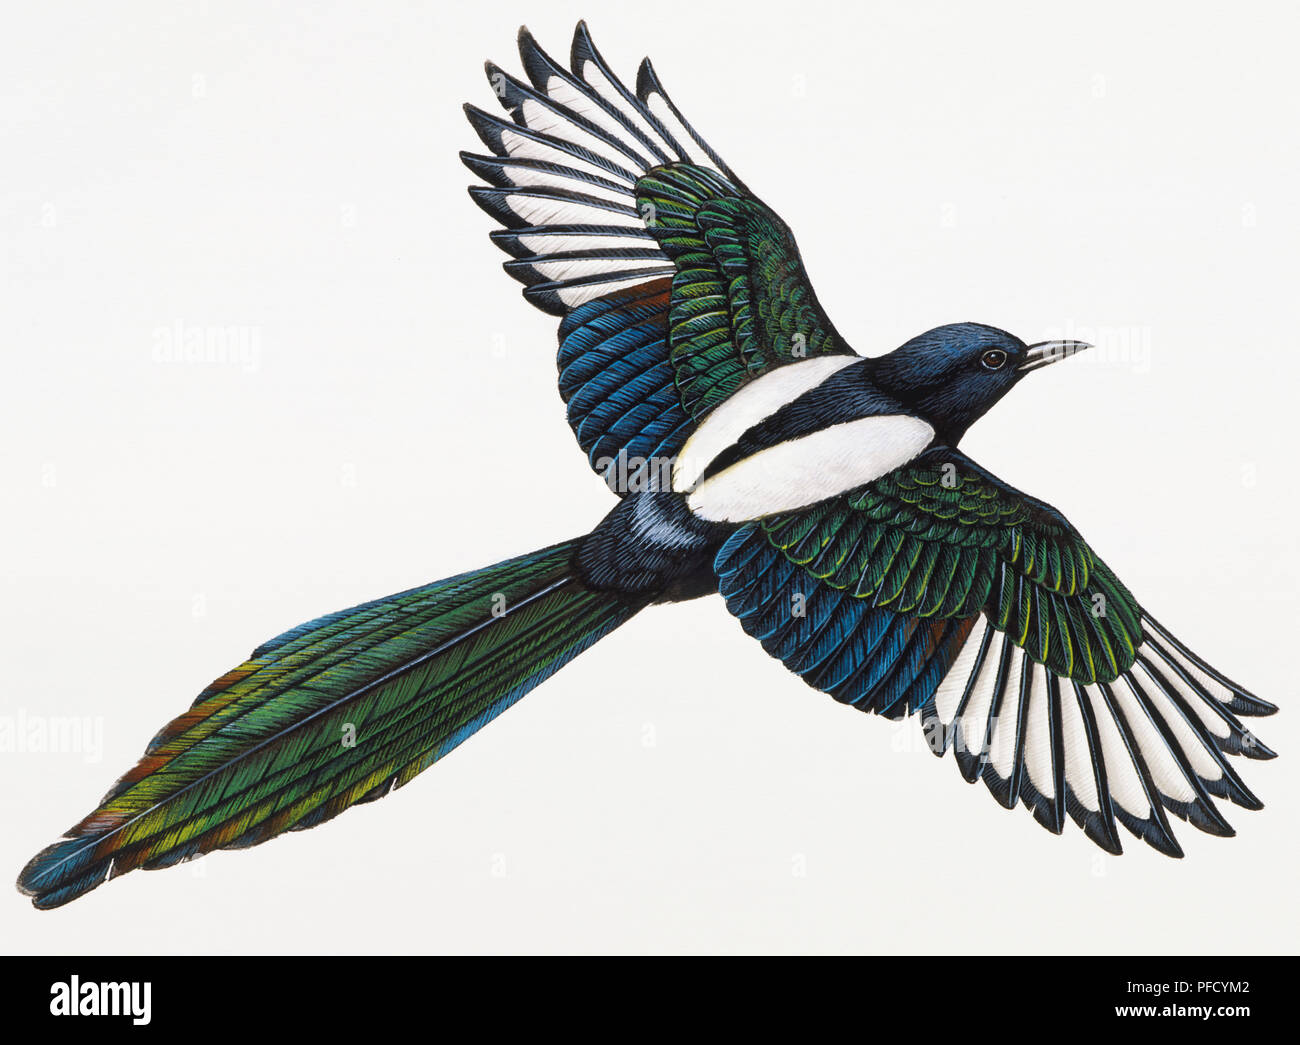 Black-billed Magpie, Picca pica, flying Stock Photo